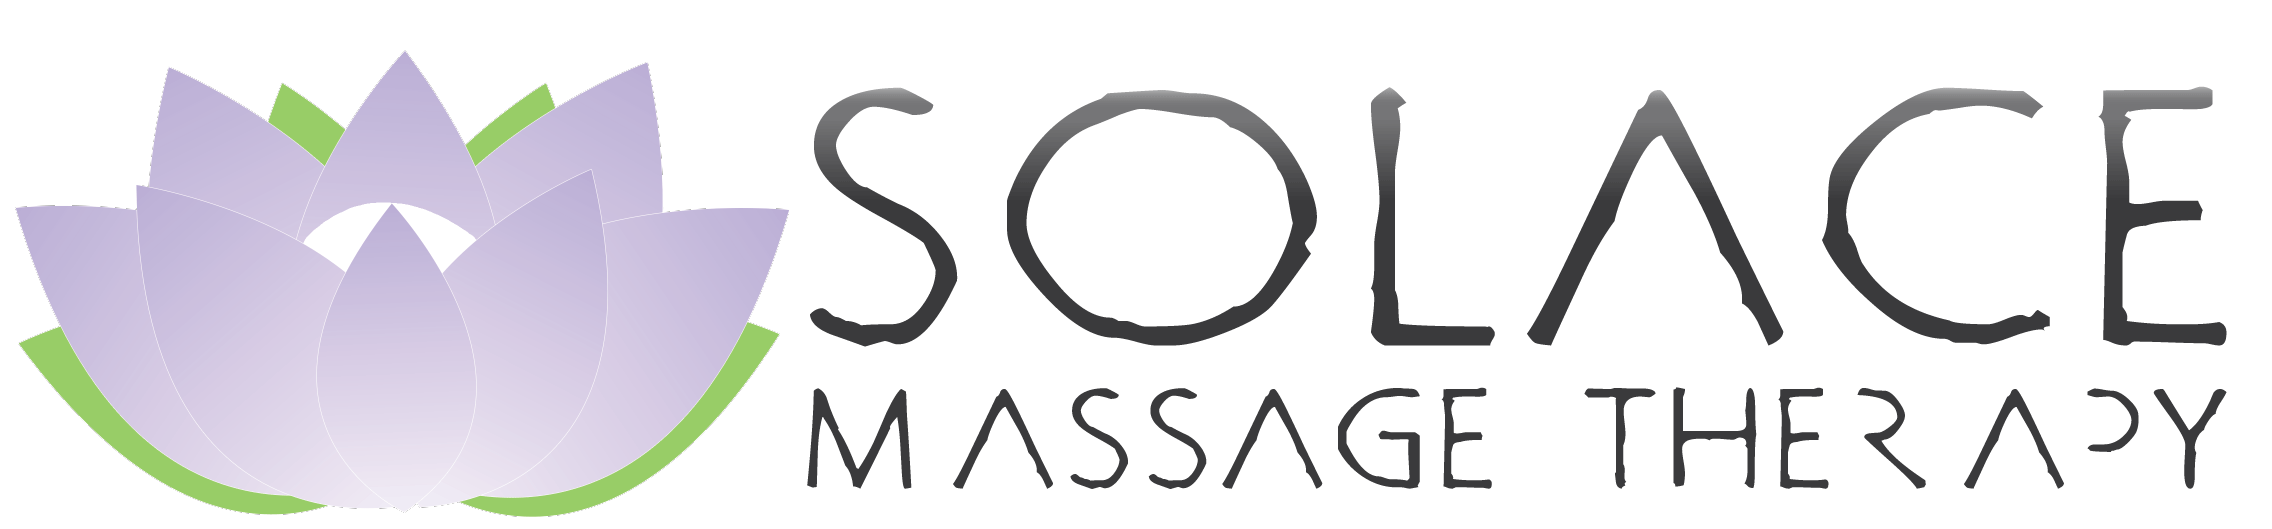 solace massage therapy logo